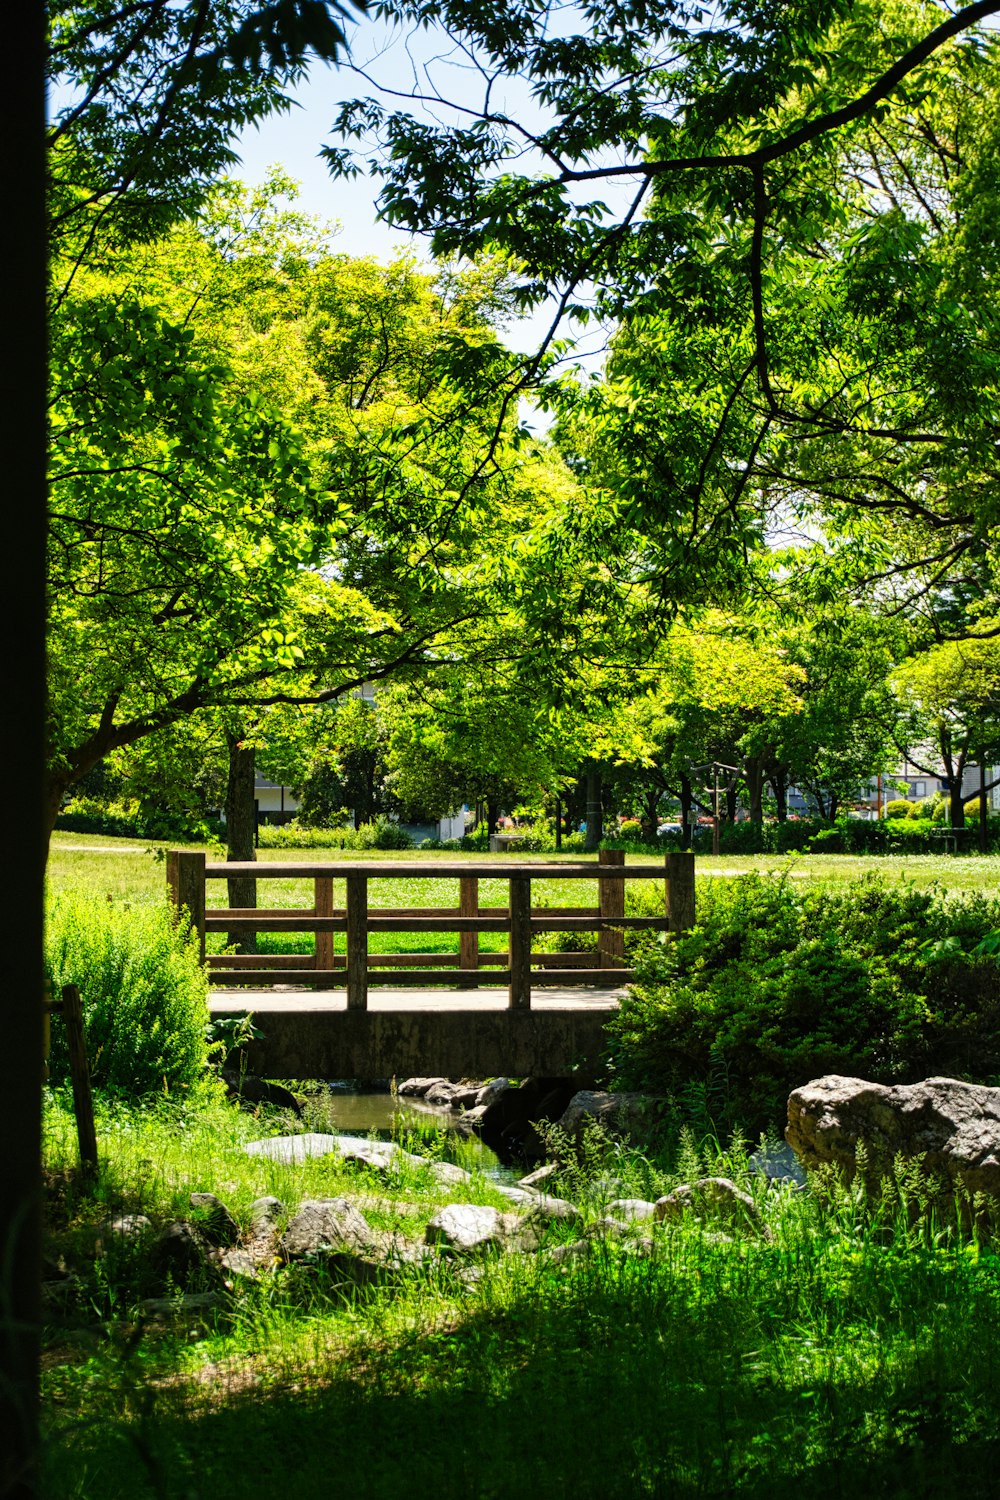 a wooden bench sitting in the middle of a lush green park